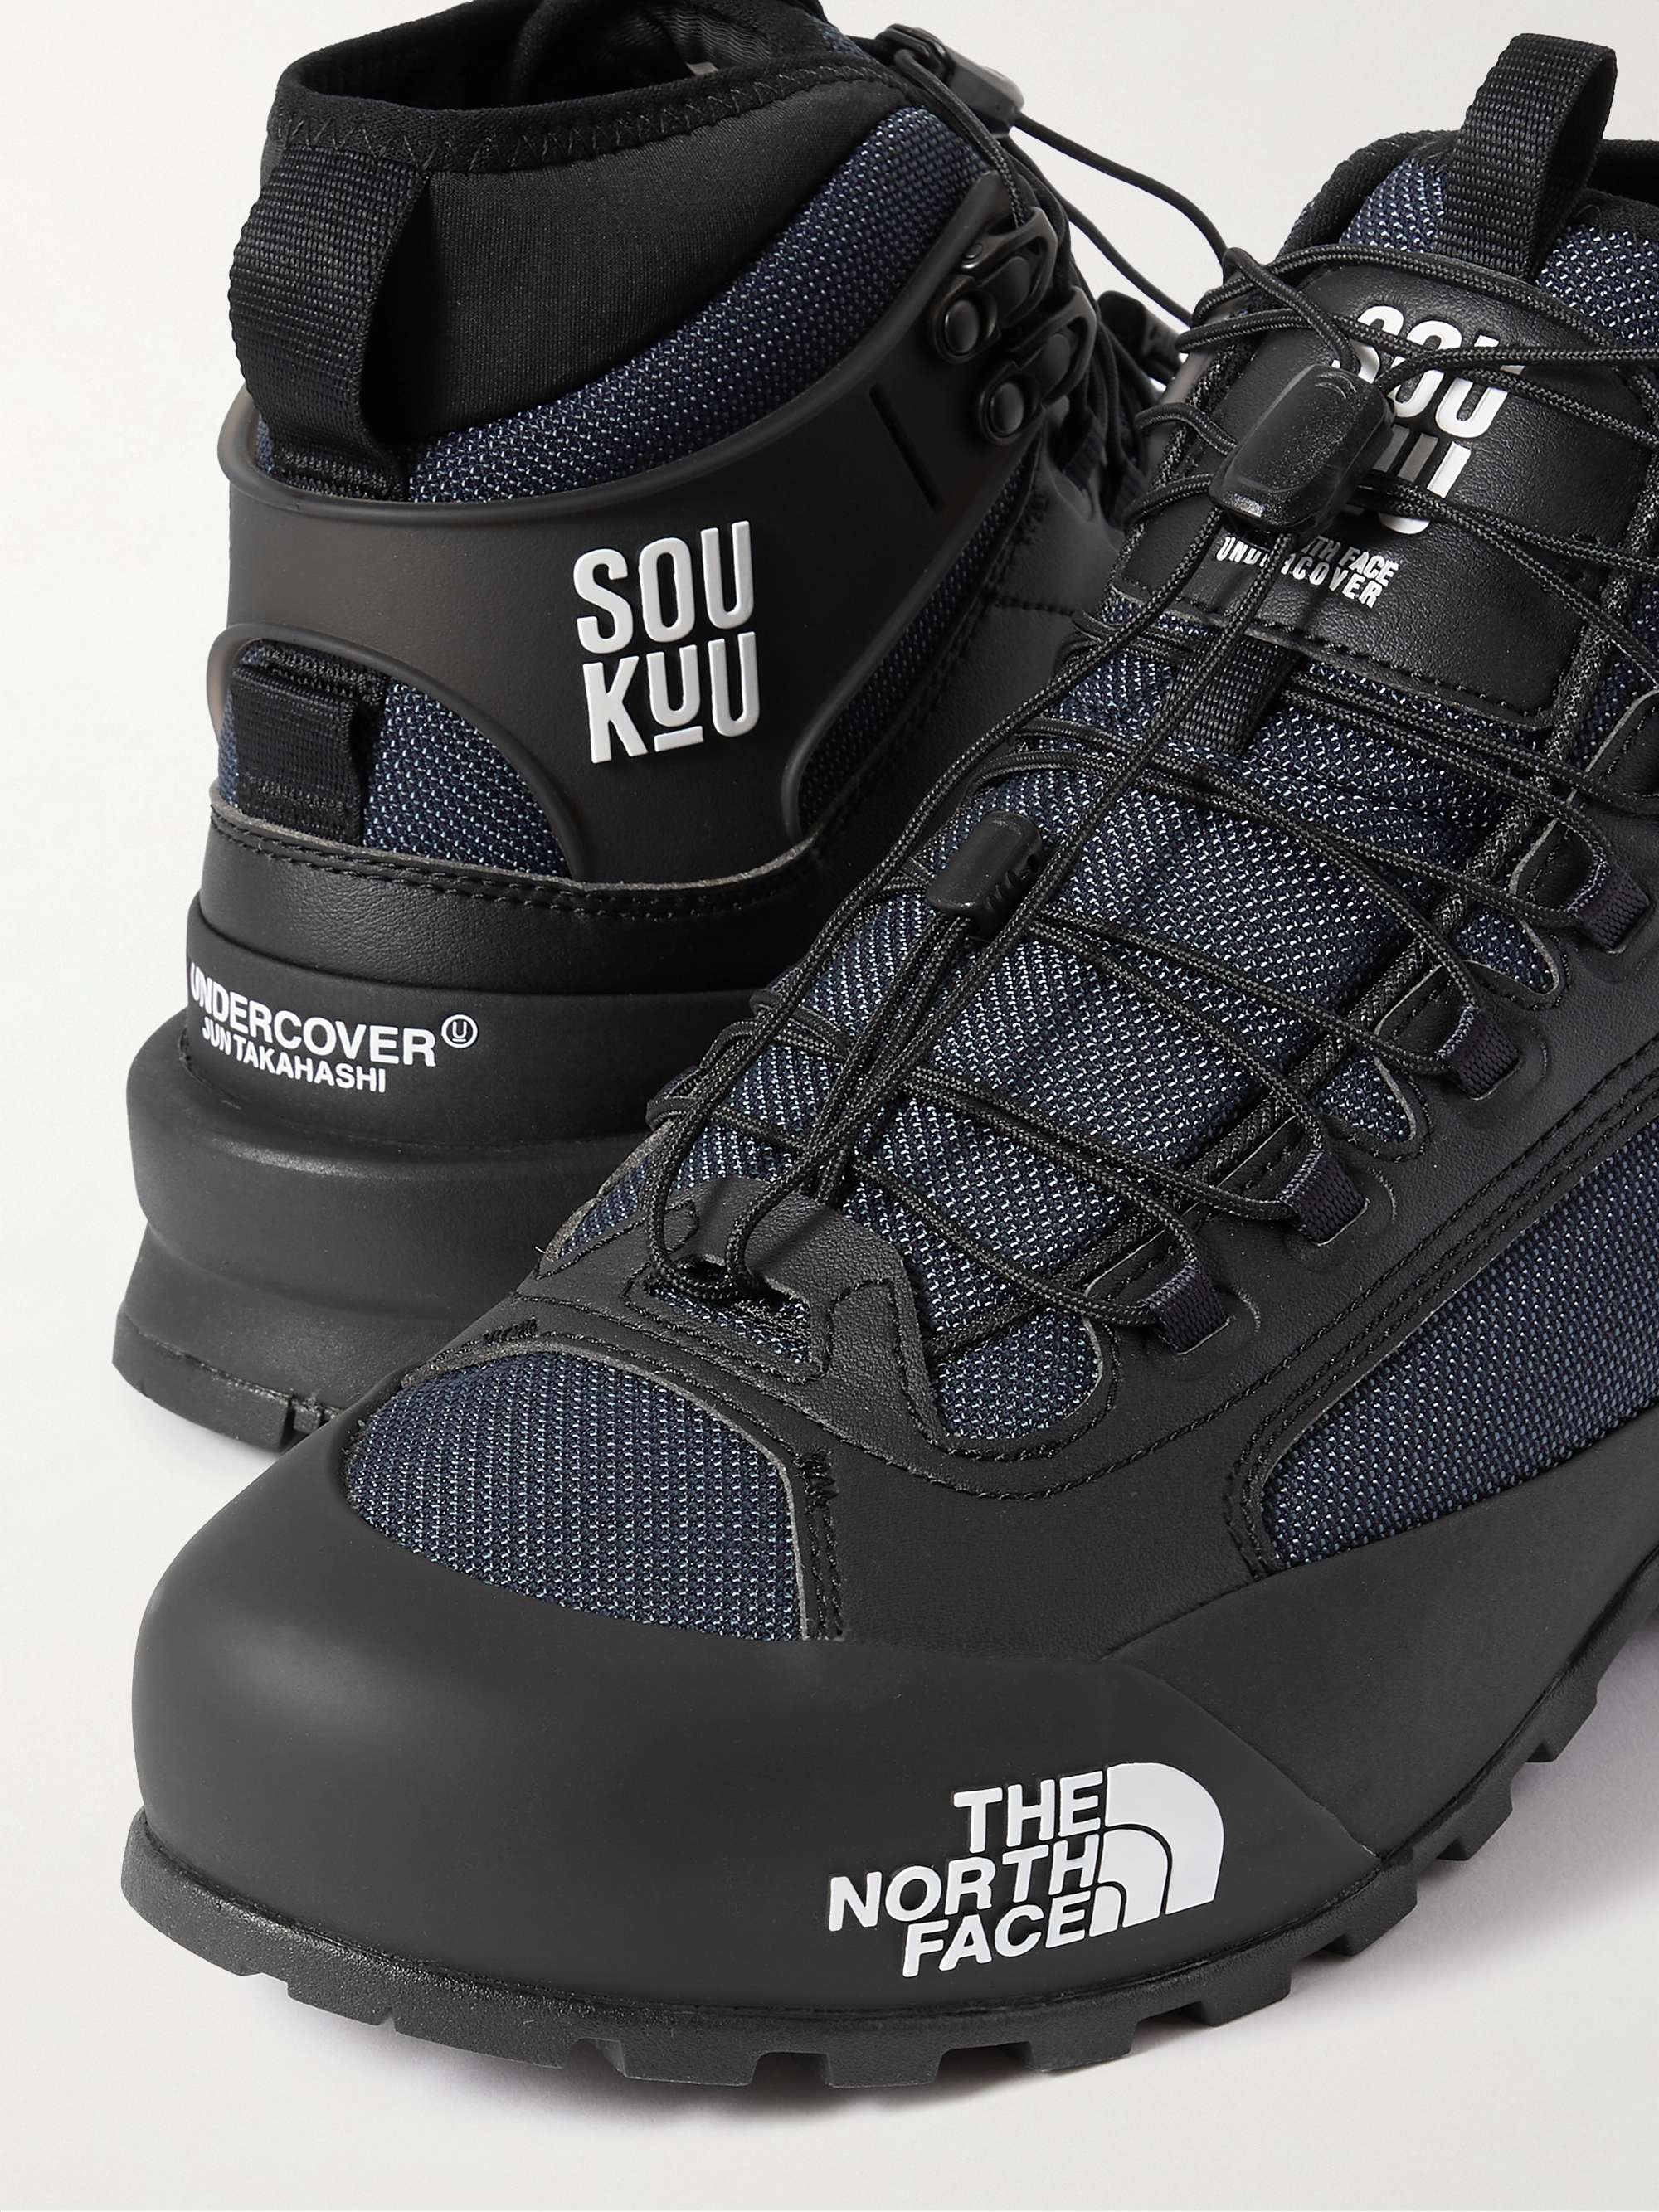 THE NORTH FACE + Undercover Soukuu Canvas and Rubber Hiking Boots for Men |  MR PORTER